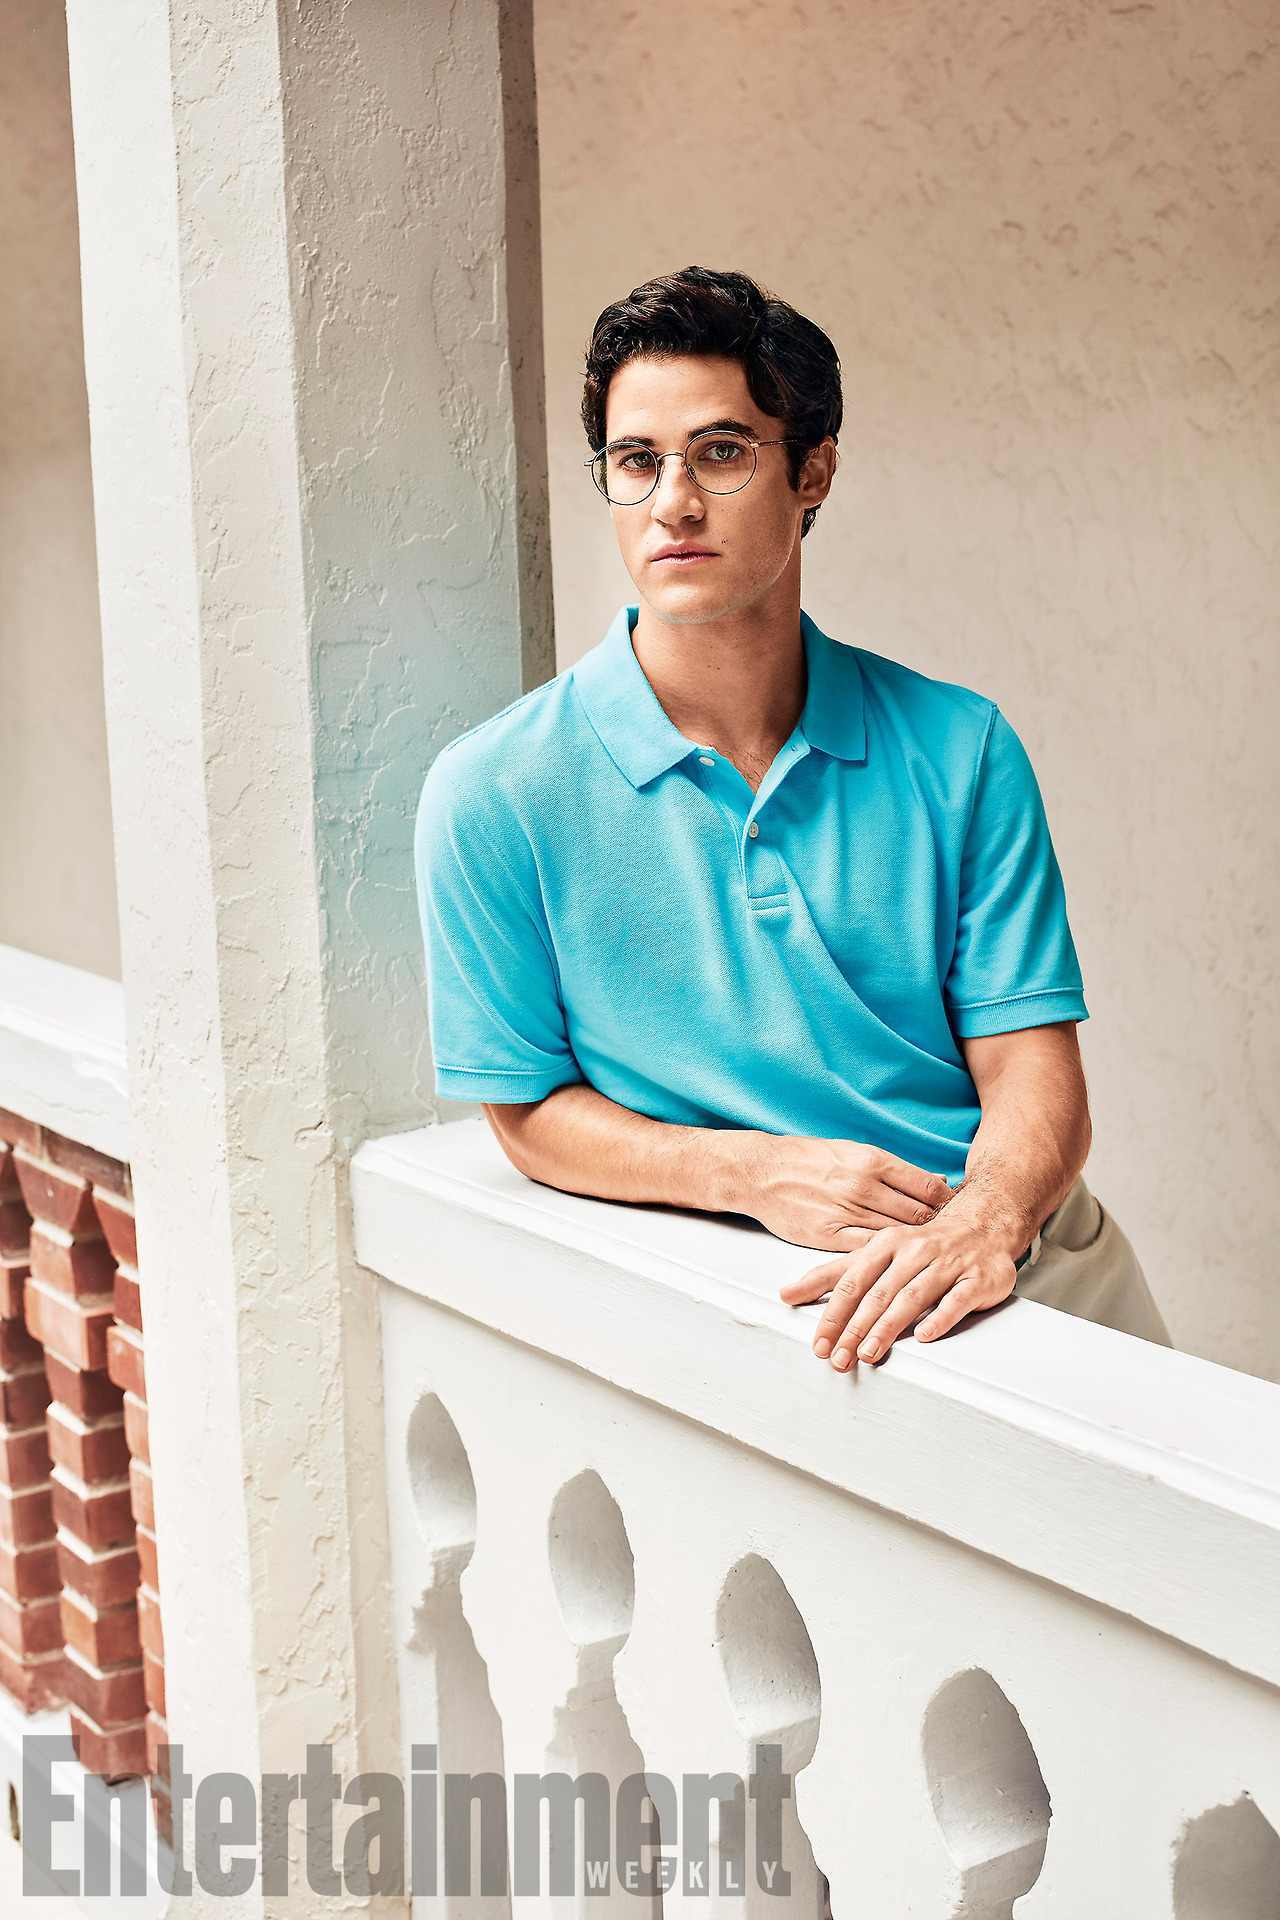 darrencriss - The Assassination of Gianni Versace:  American Crime Story - Page 4 Tumblr_orwnkmfMvb1wpi2k2o2_1280